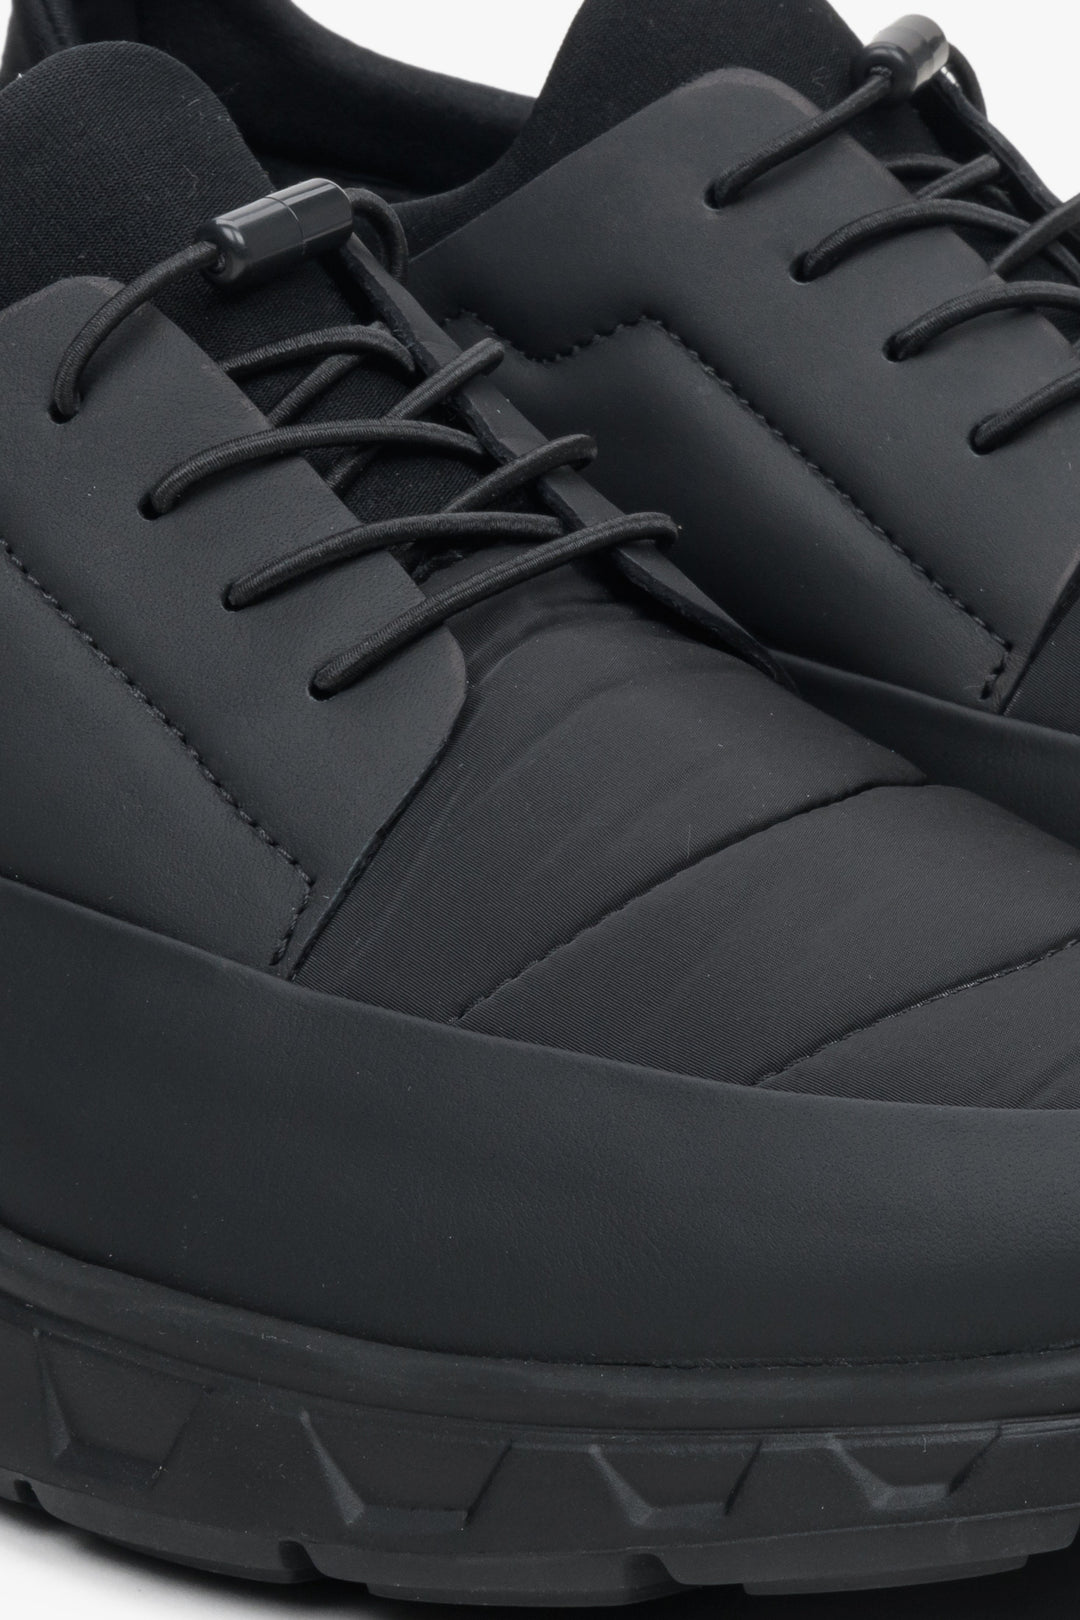 Men's black sneakers made of mixed materials by Estro - close-up on the detail.